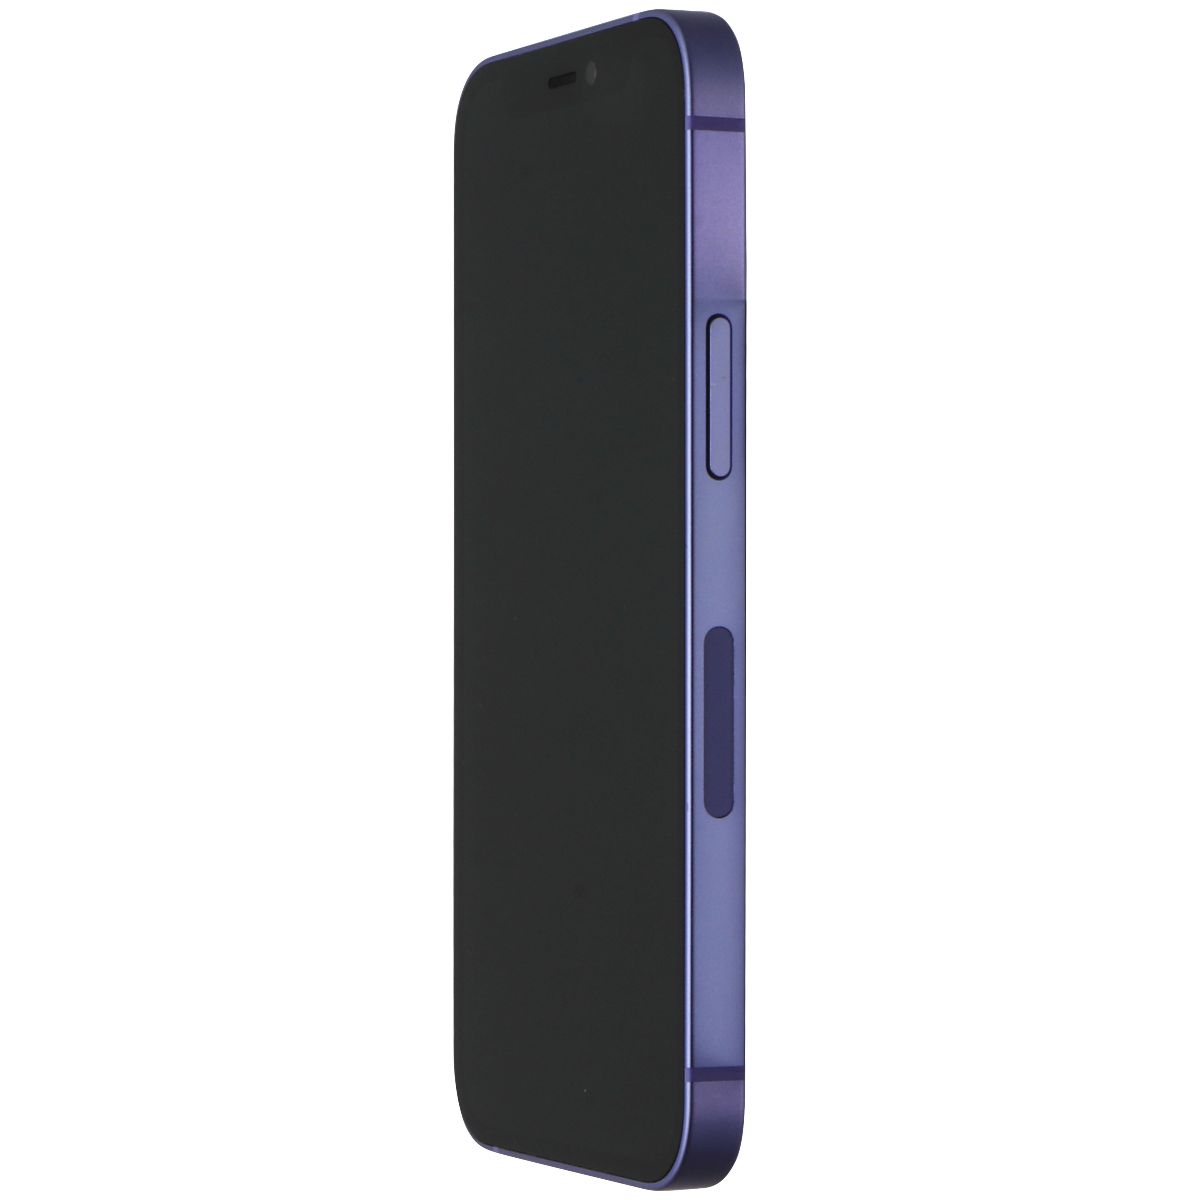 Apple iPhone 12 mini (5.4-inch) (A2176) Spectrum Only - 64GB/Purple *Bad Face ID Cell Phones & Smartphones Apple    - Simple Cell Bulk Wholesale Pricing - USA Seller